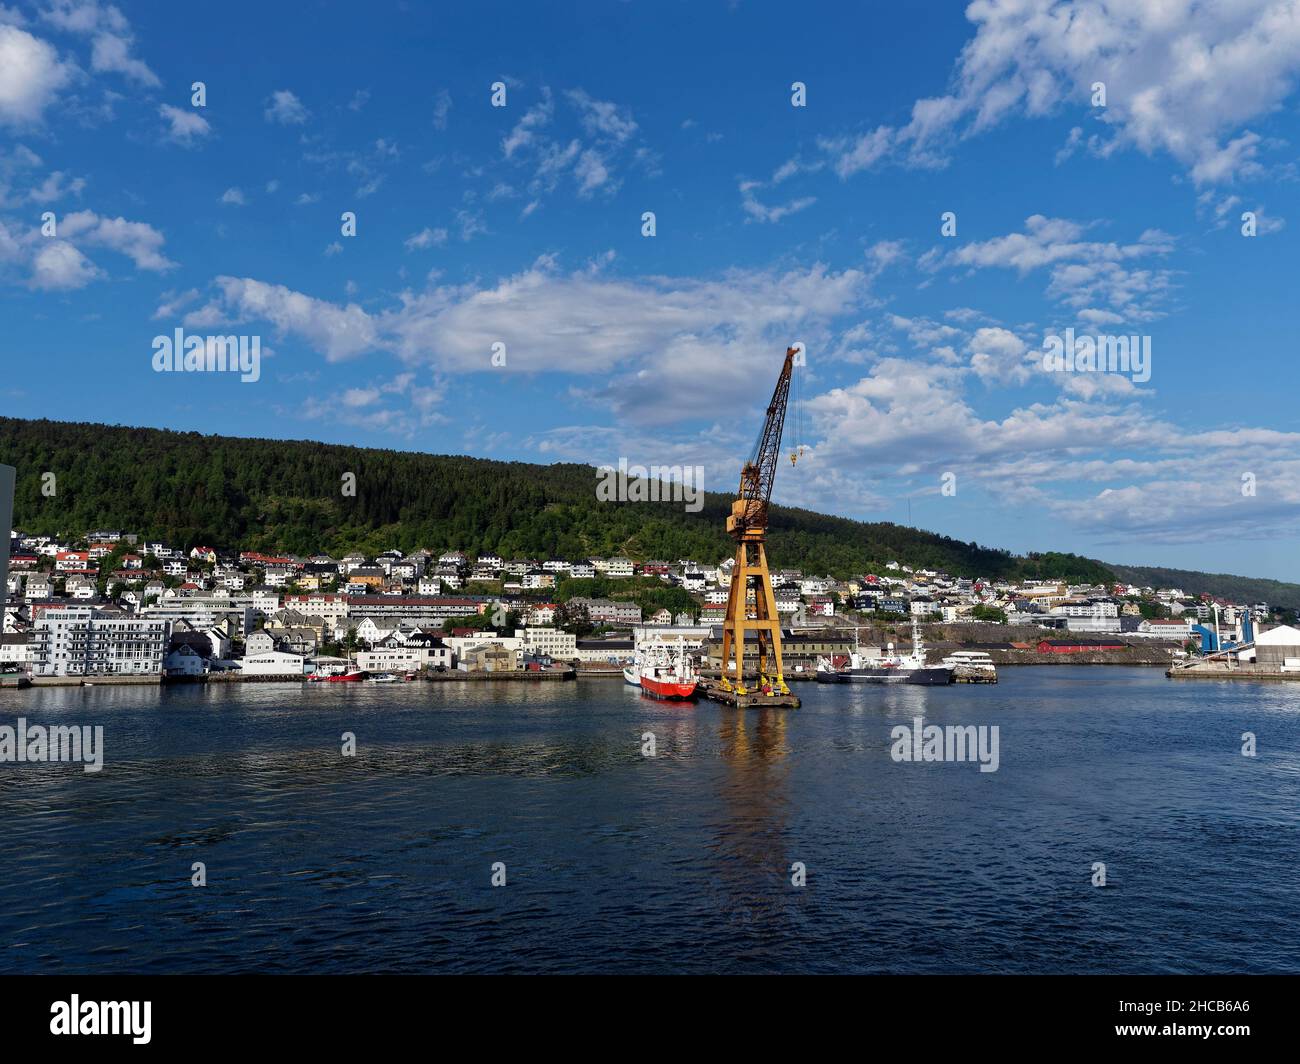 Fishing Vessels moored beside a large Yellow Shore Crane at the Fishing Port in Bergen, with apartments and houses at the waterfront. Stock Photo